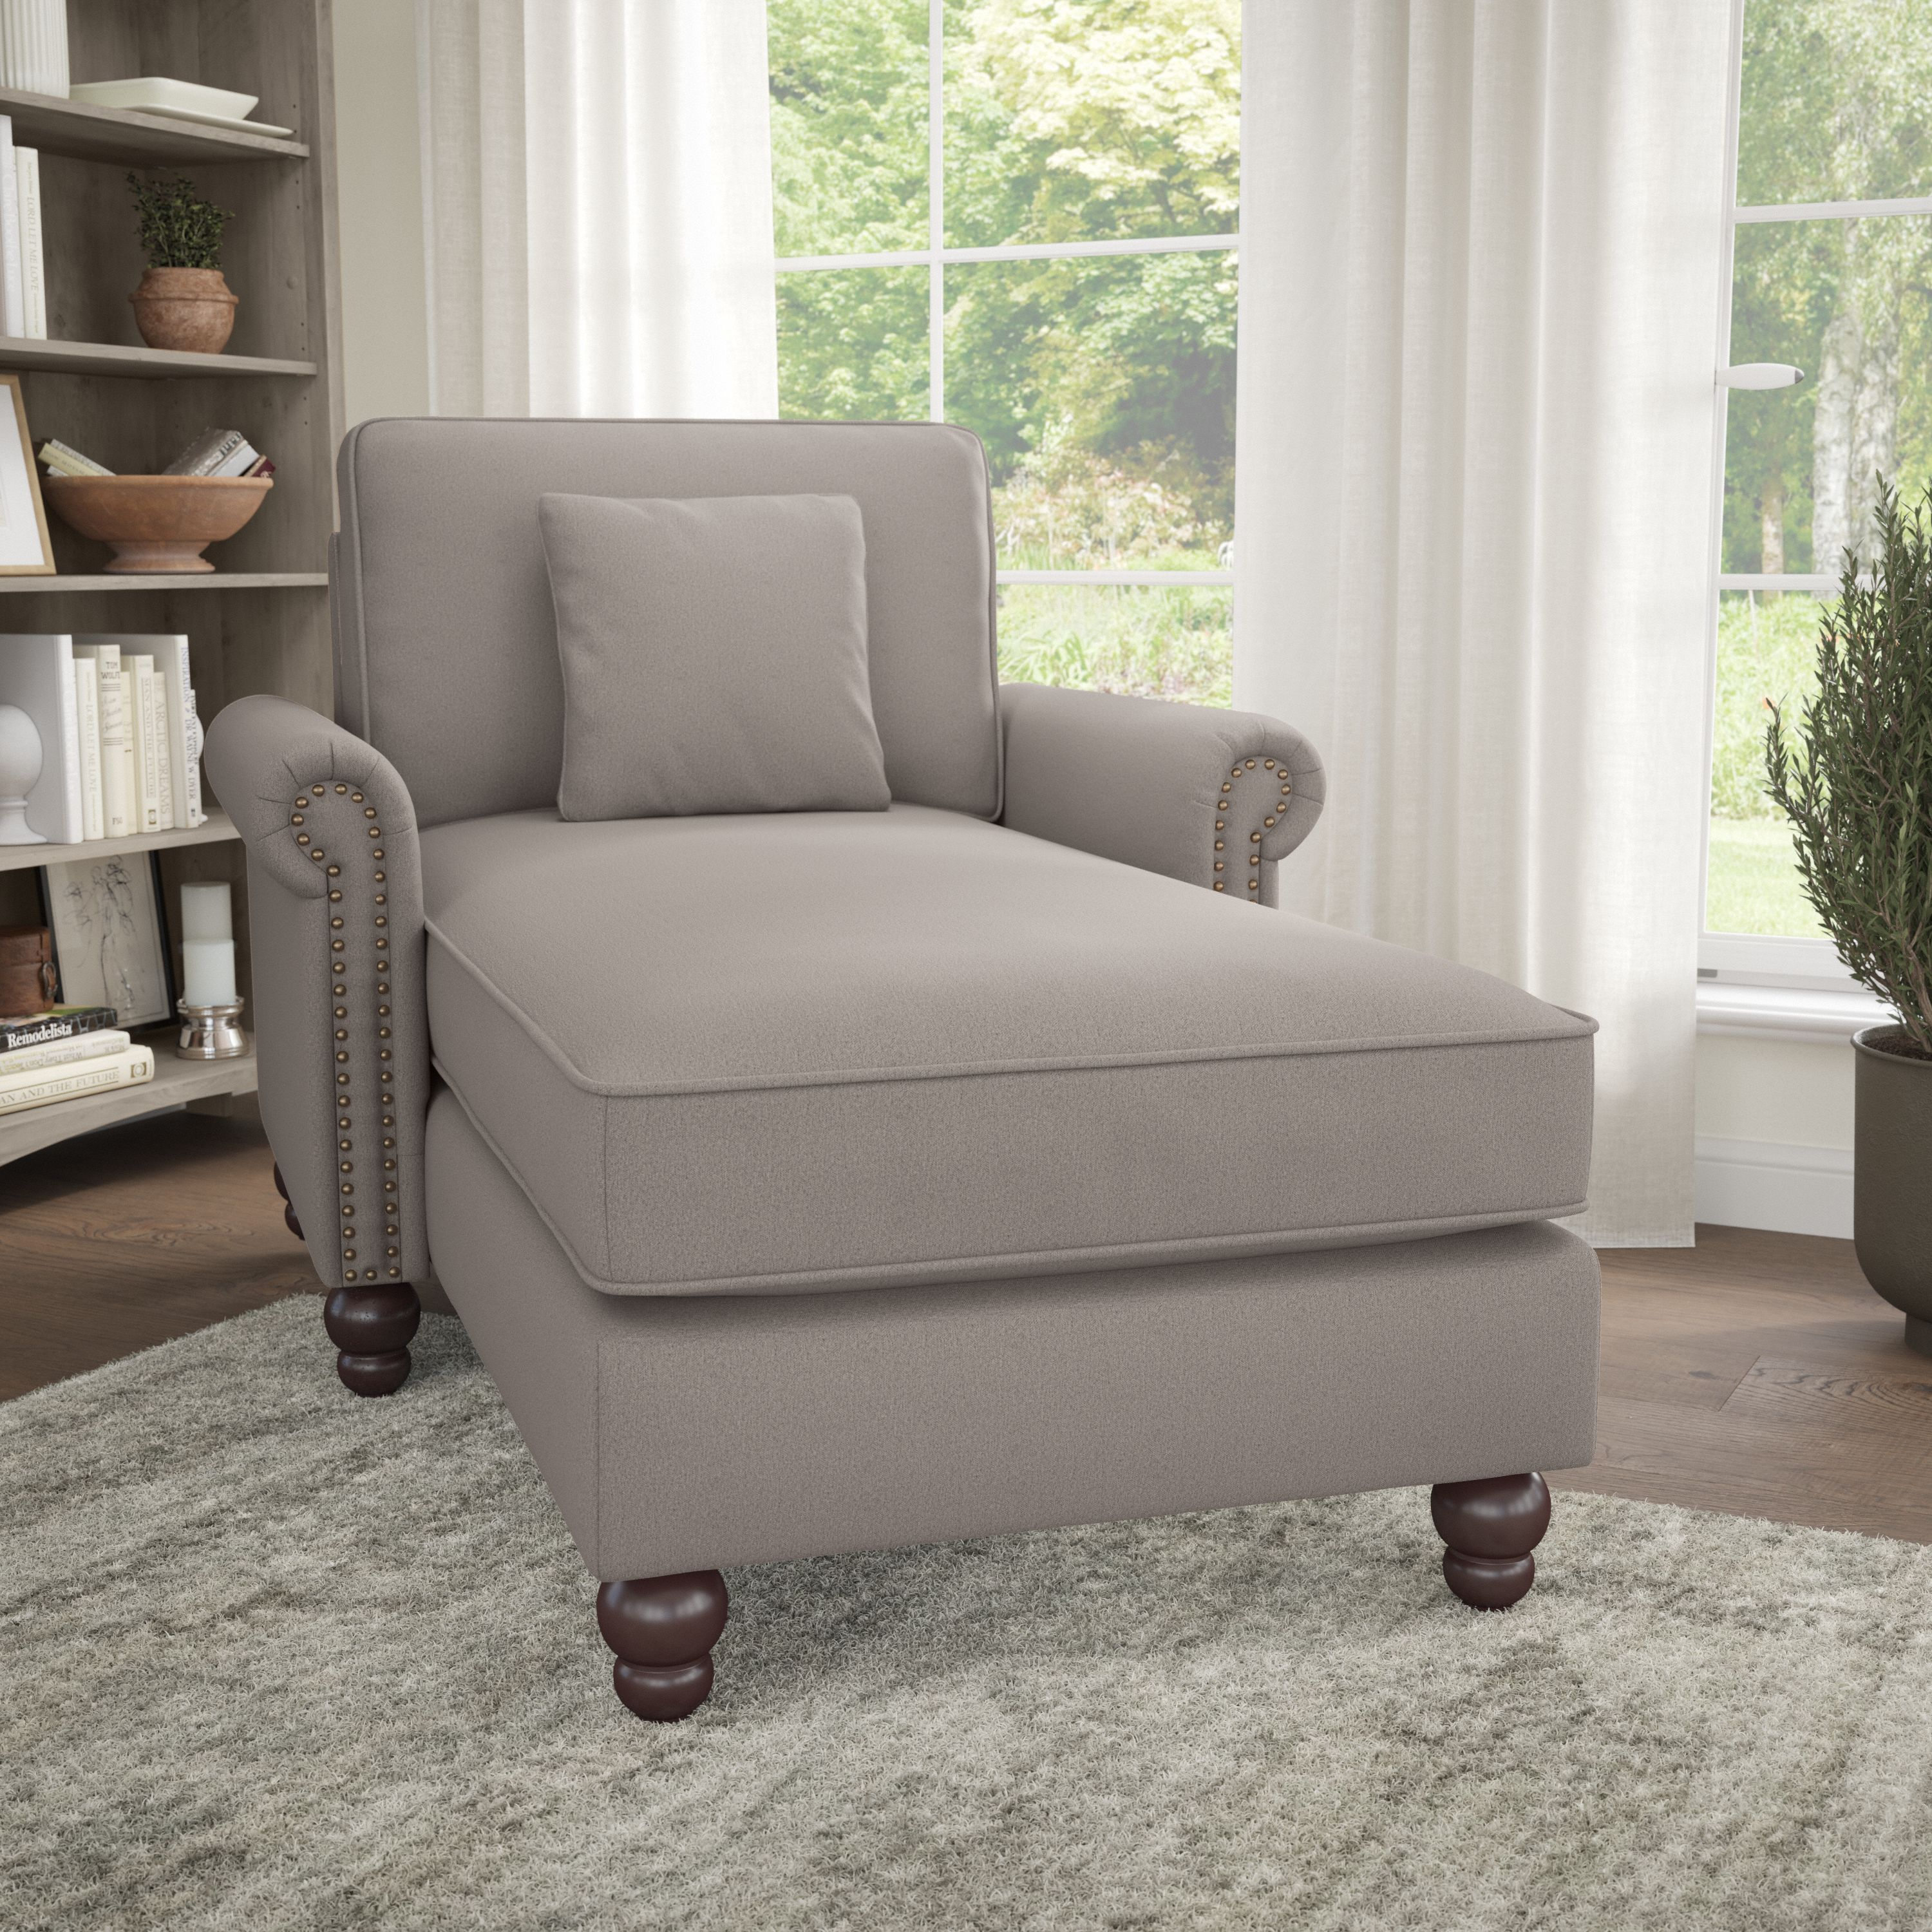 Shop Bush Furniture Coventry Chaise Lounge with Arms 01 CVM41BBGH-03K #color_beige herringbone fabric